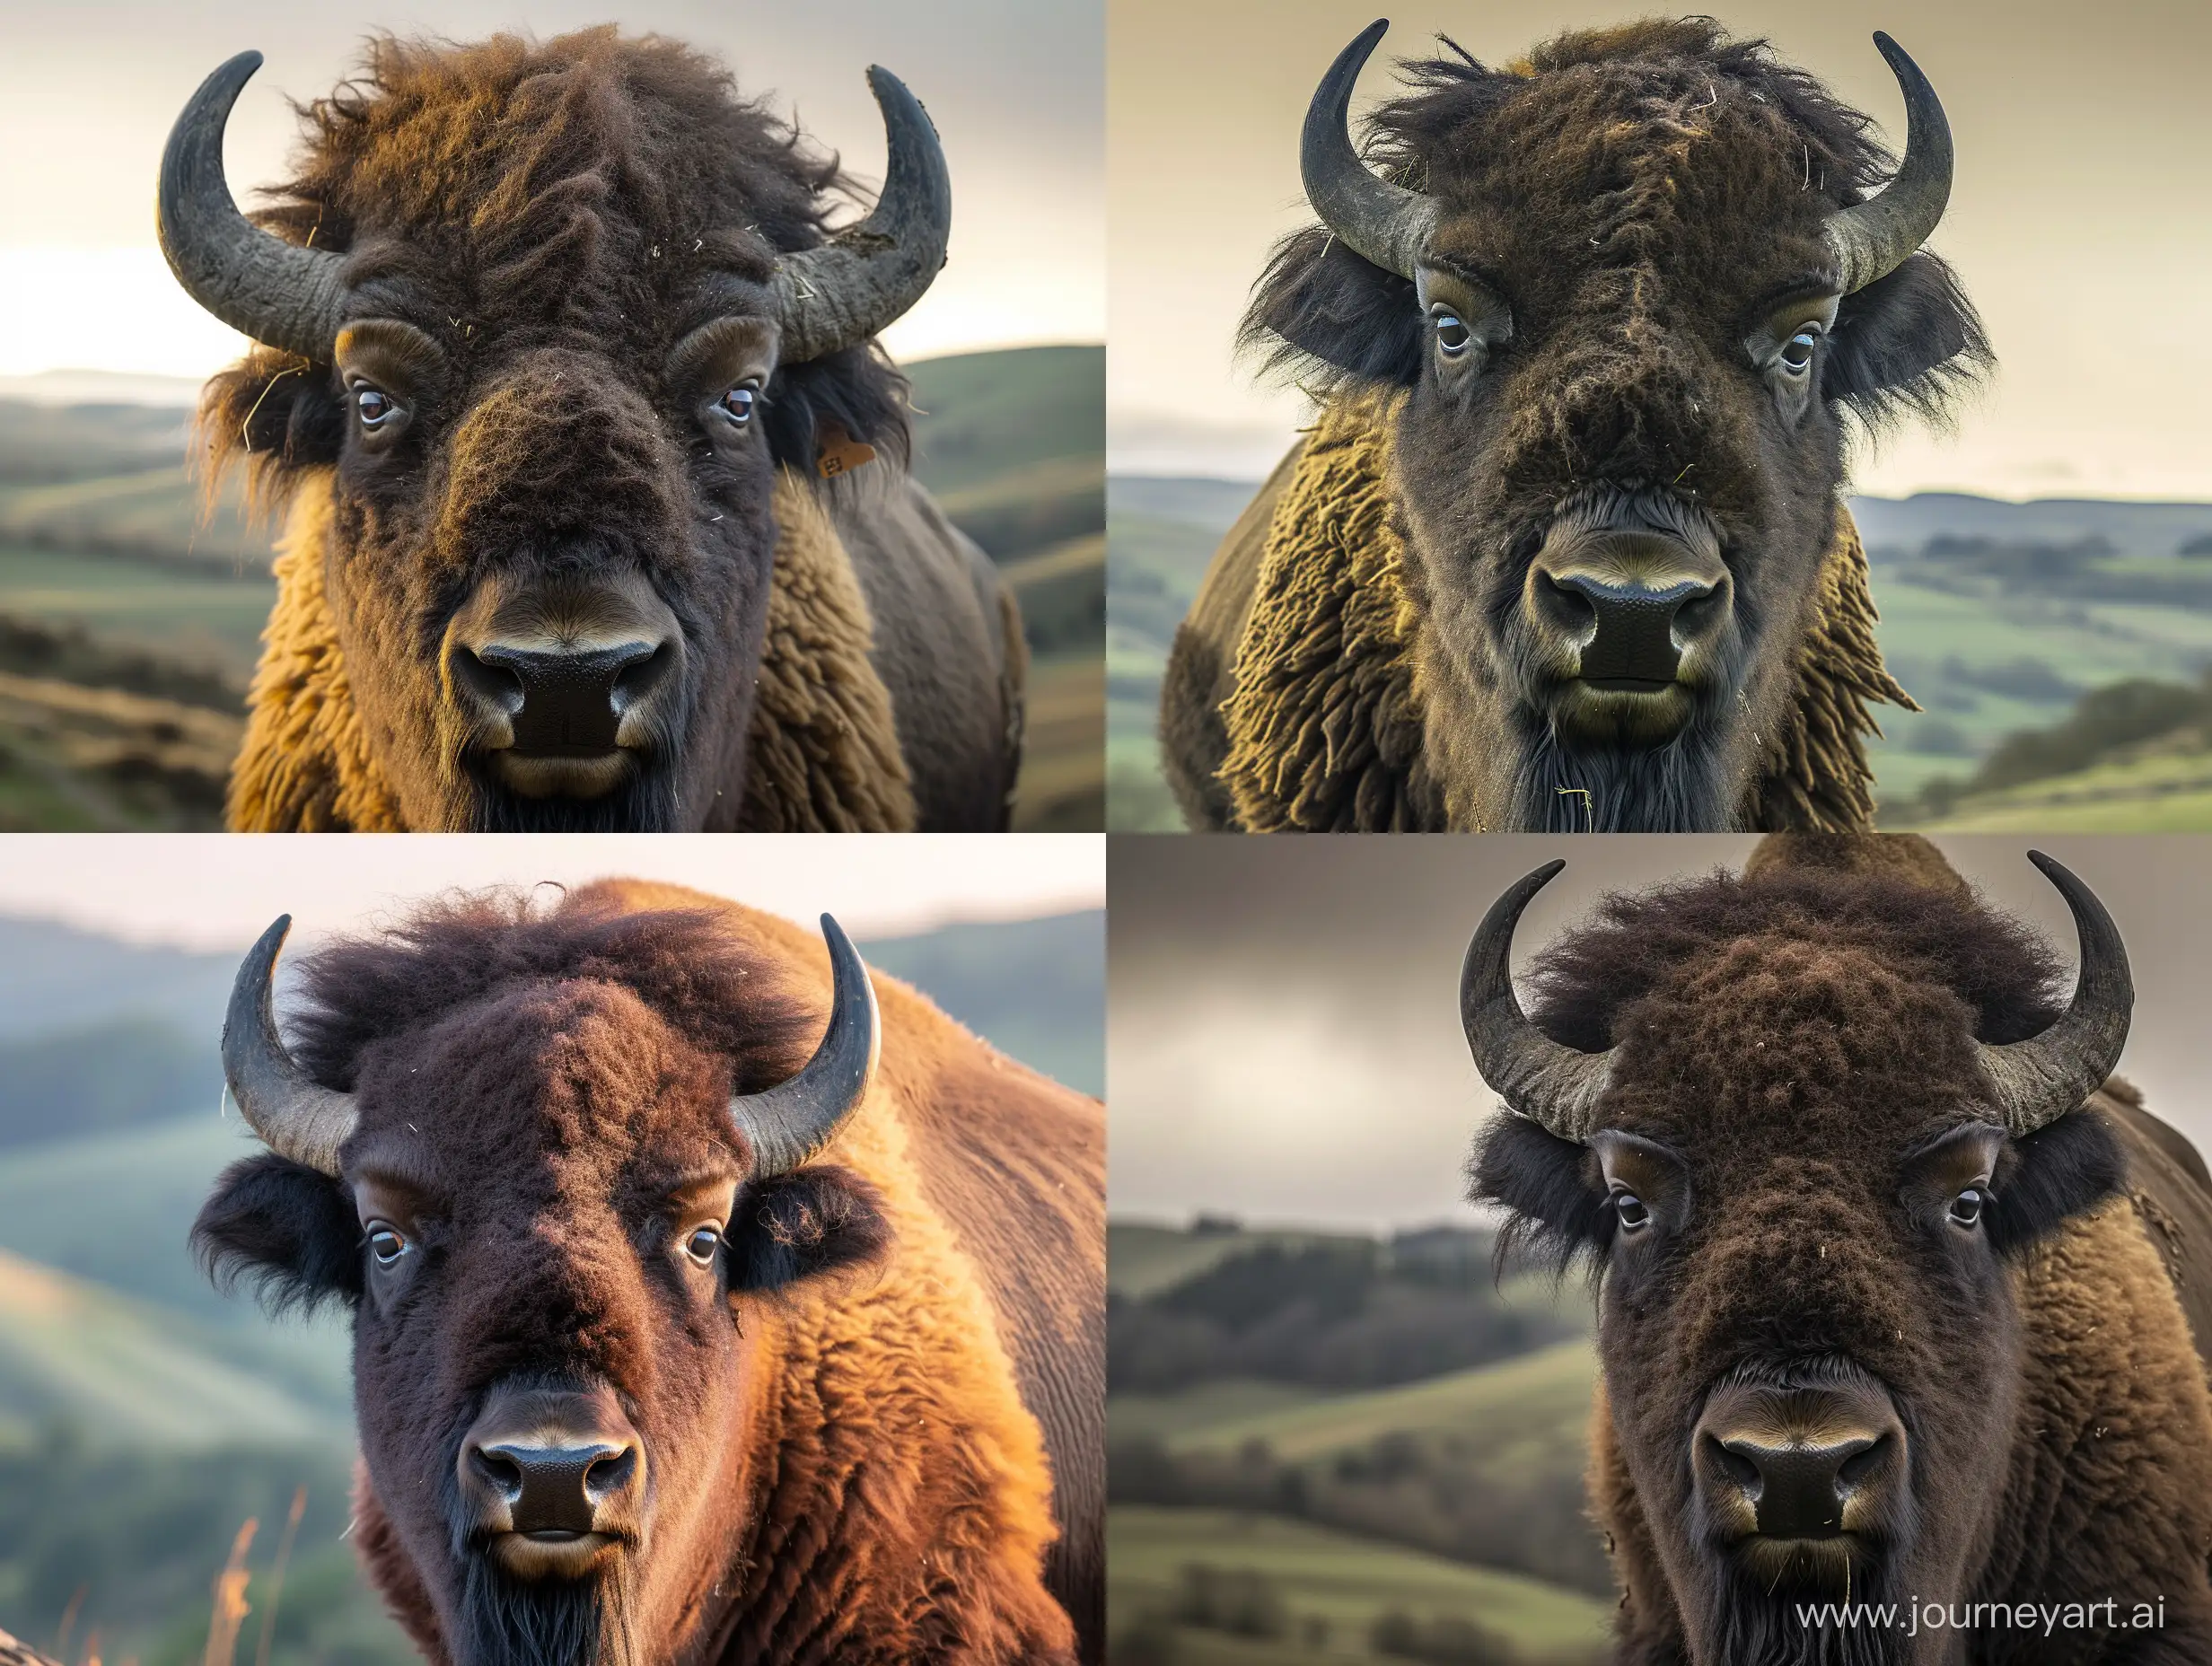 Ultra-realistic close-up photo of a large hairy bison, featuring highly detailed eyes, intricate skin and hair textures, rolling hills in the background, illuminated by natural, soft daylight, captured from a frontal perspective, using a Canon EOS 5D Mark IV with an 85mm lens